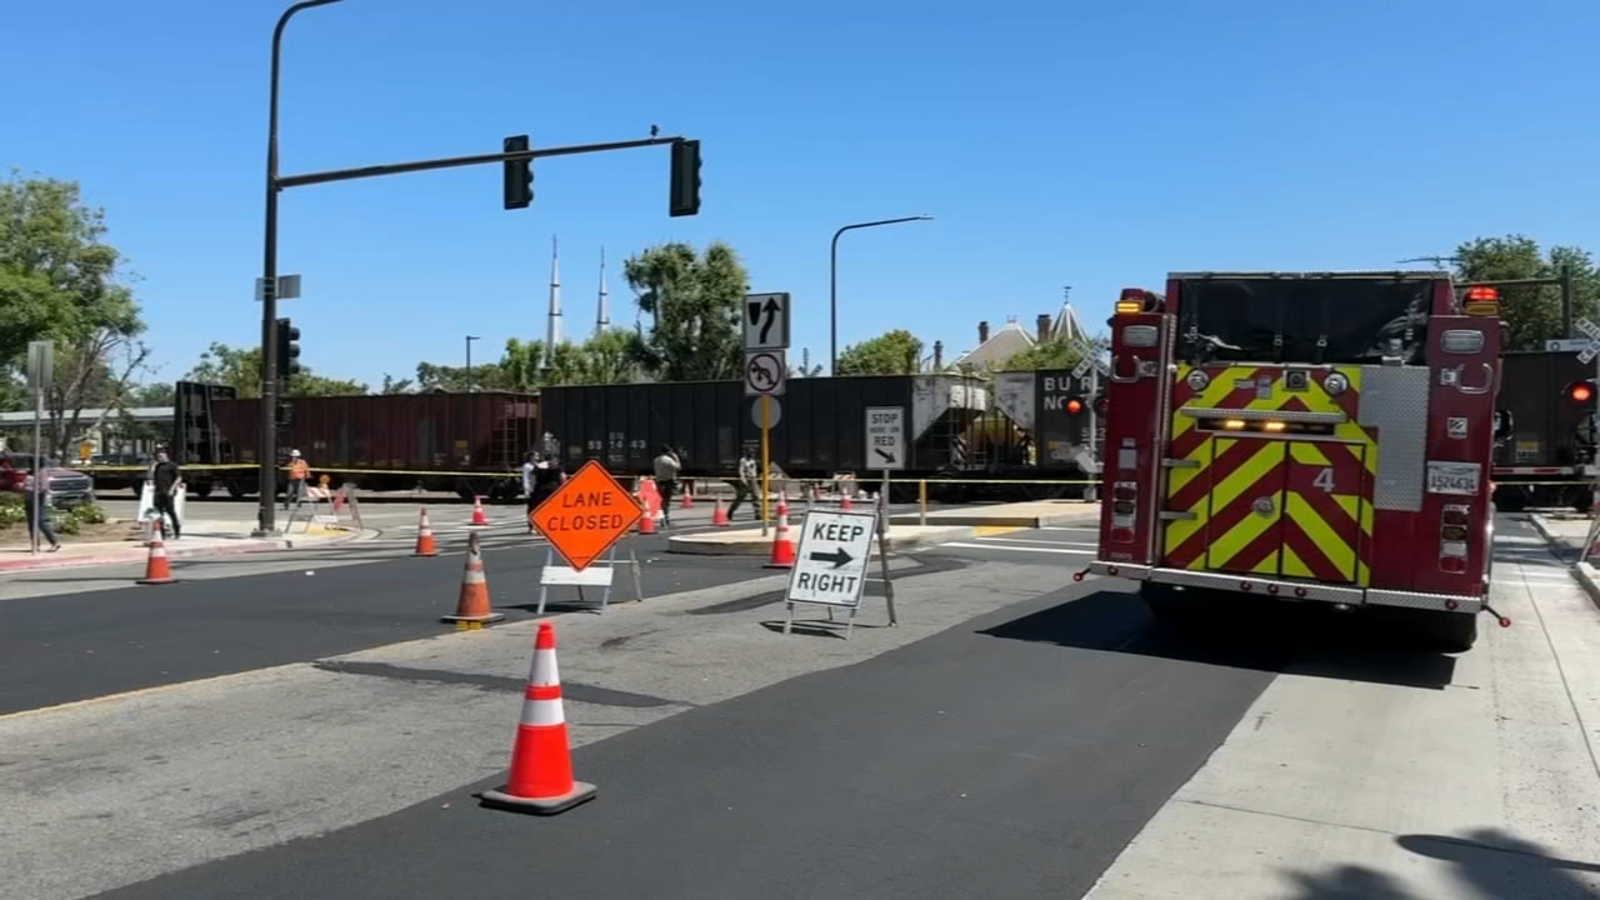 Man dies after being hit by train in Downtown Fresno, police say [Video]